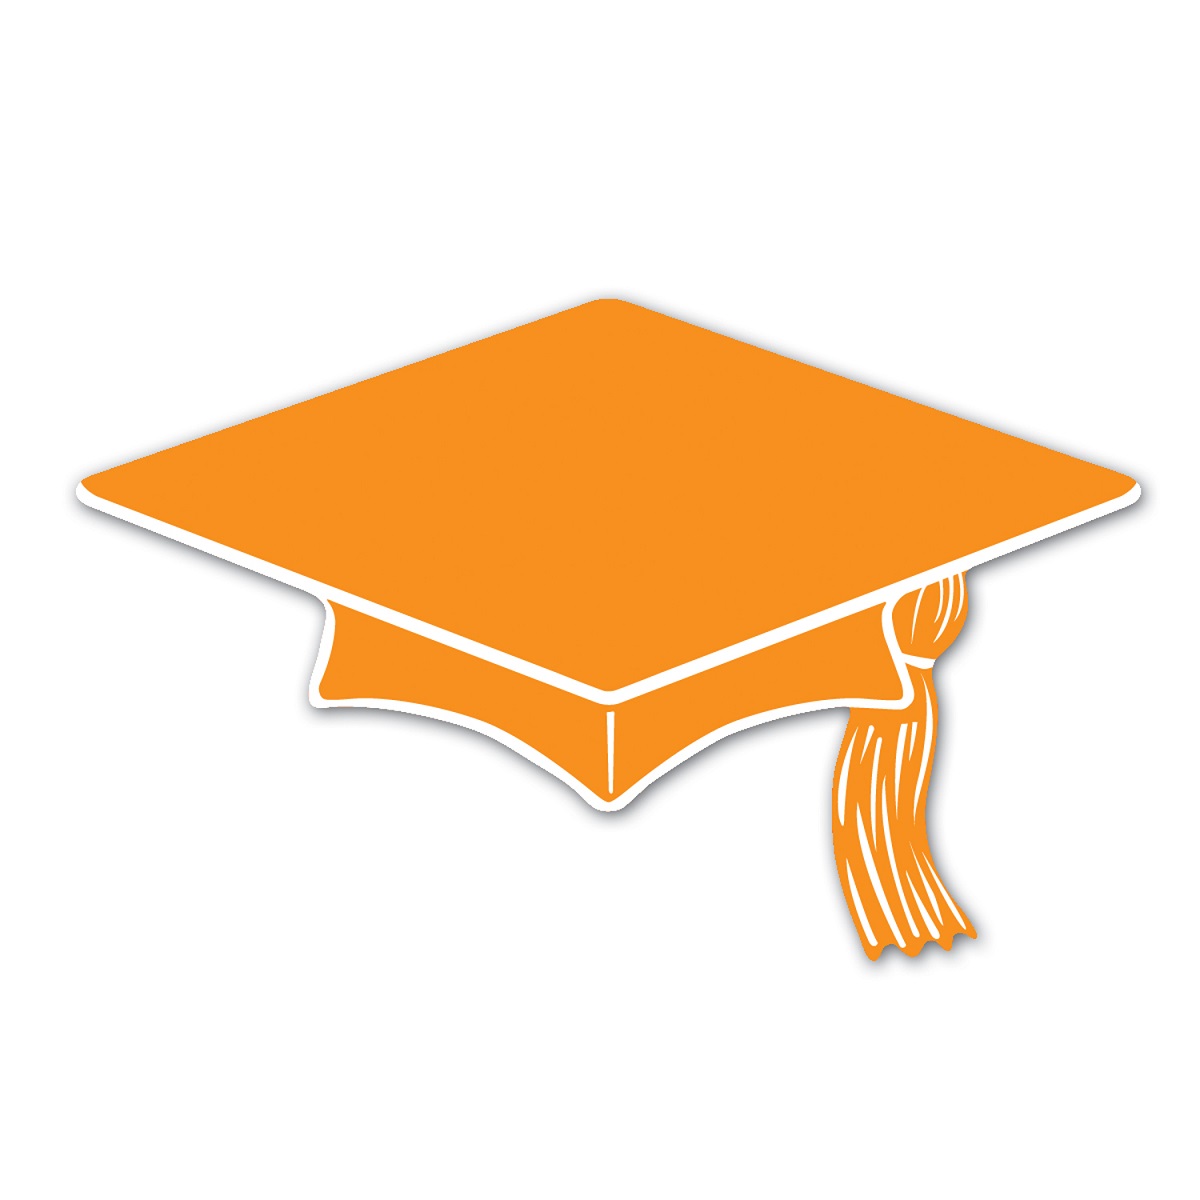 Beistle Club Pack of 240 Orange and White Mini Mortarboard Graduation Cap Cutout Party Decorations 4"